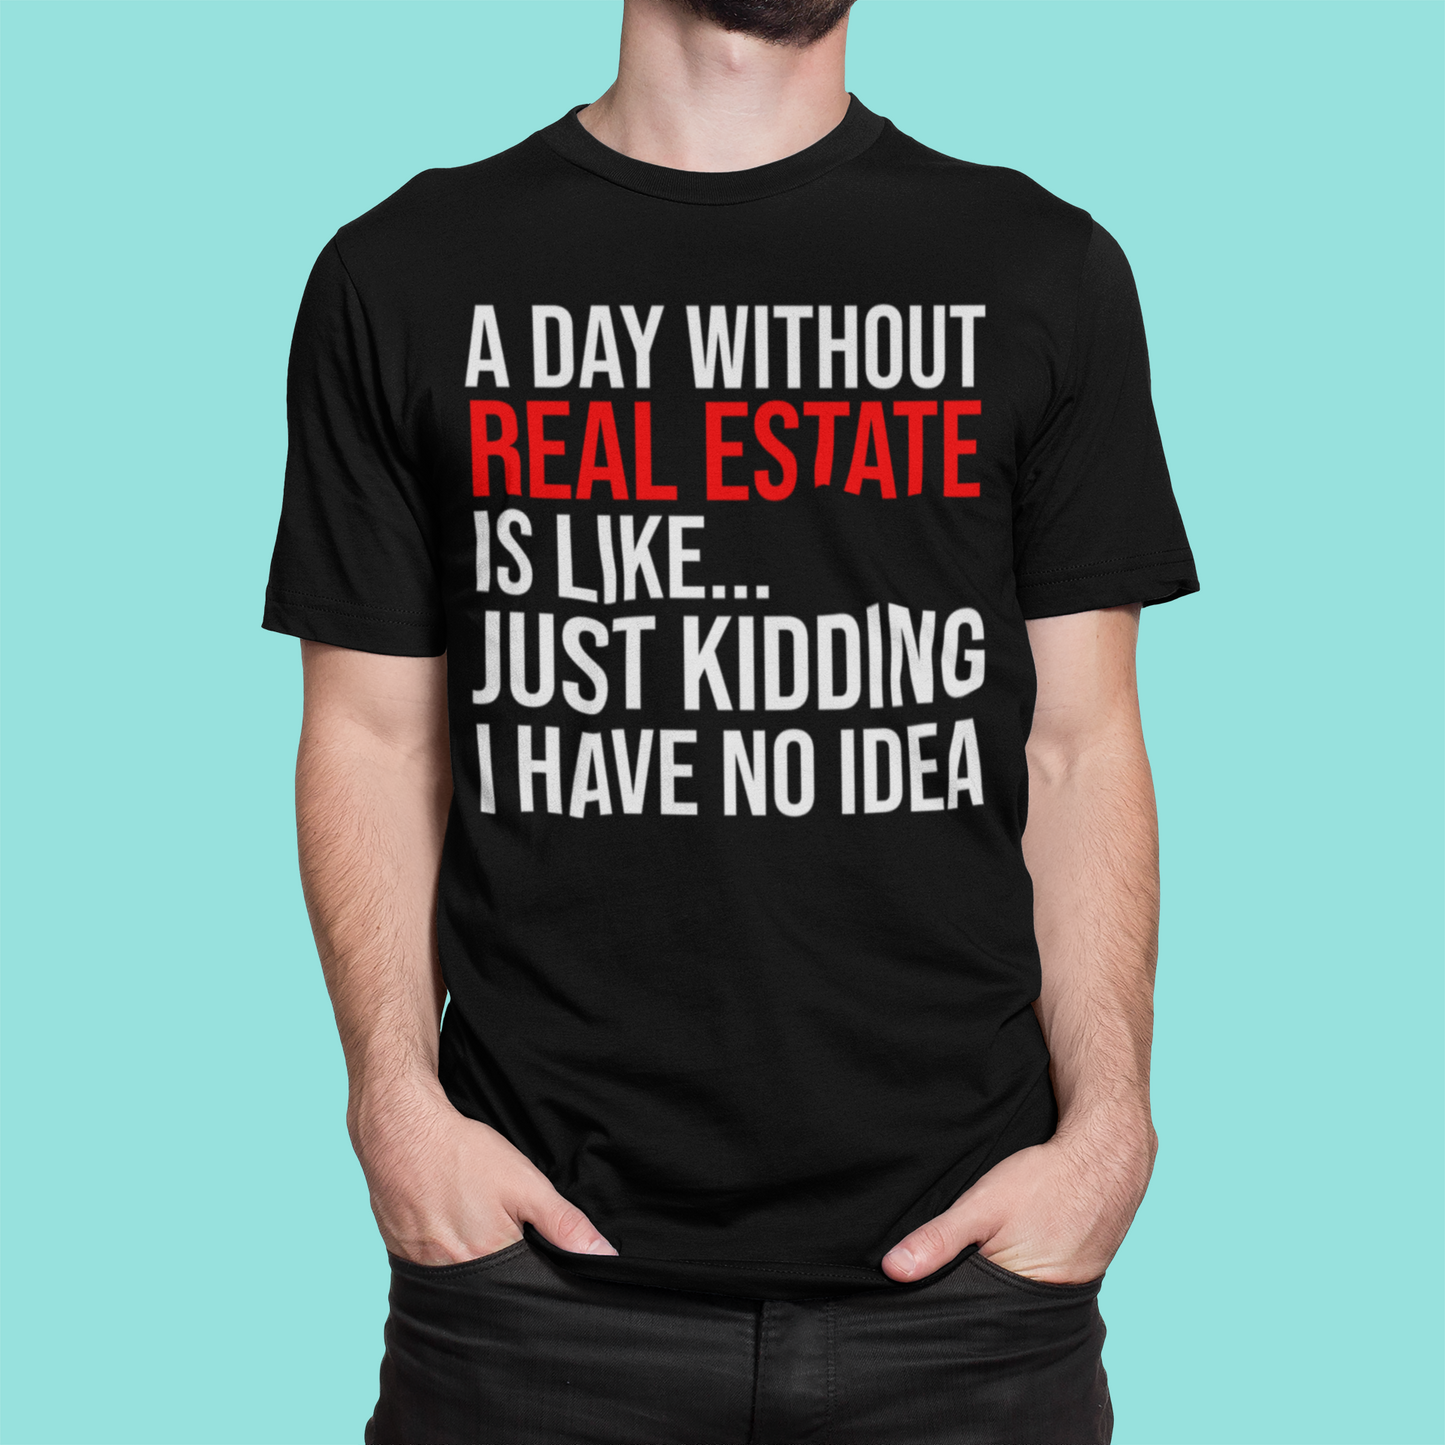 A Day Without Real Estate Is Like...